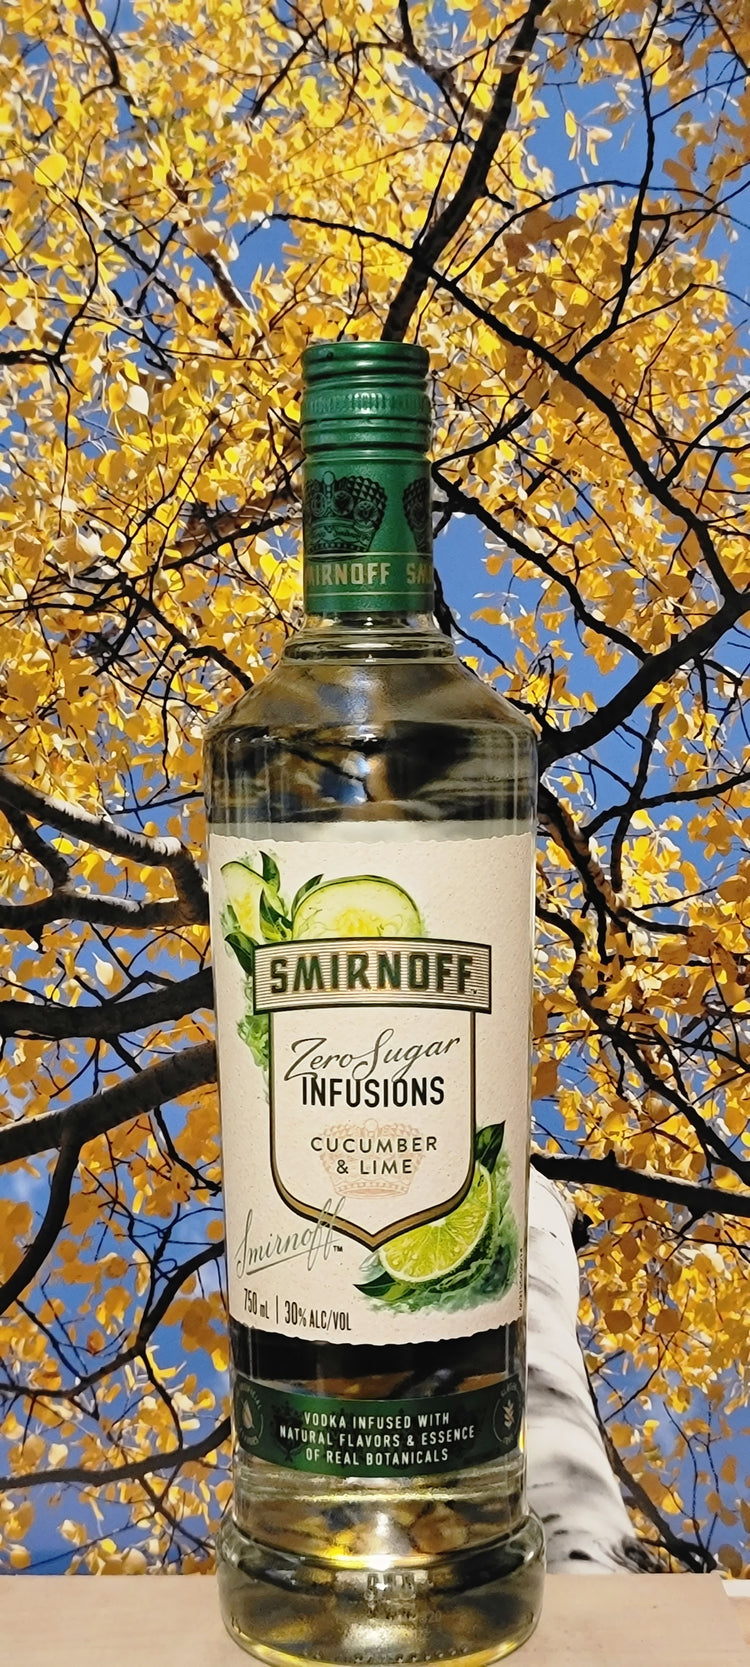 Smirnoff infusions cucumber & lime